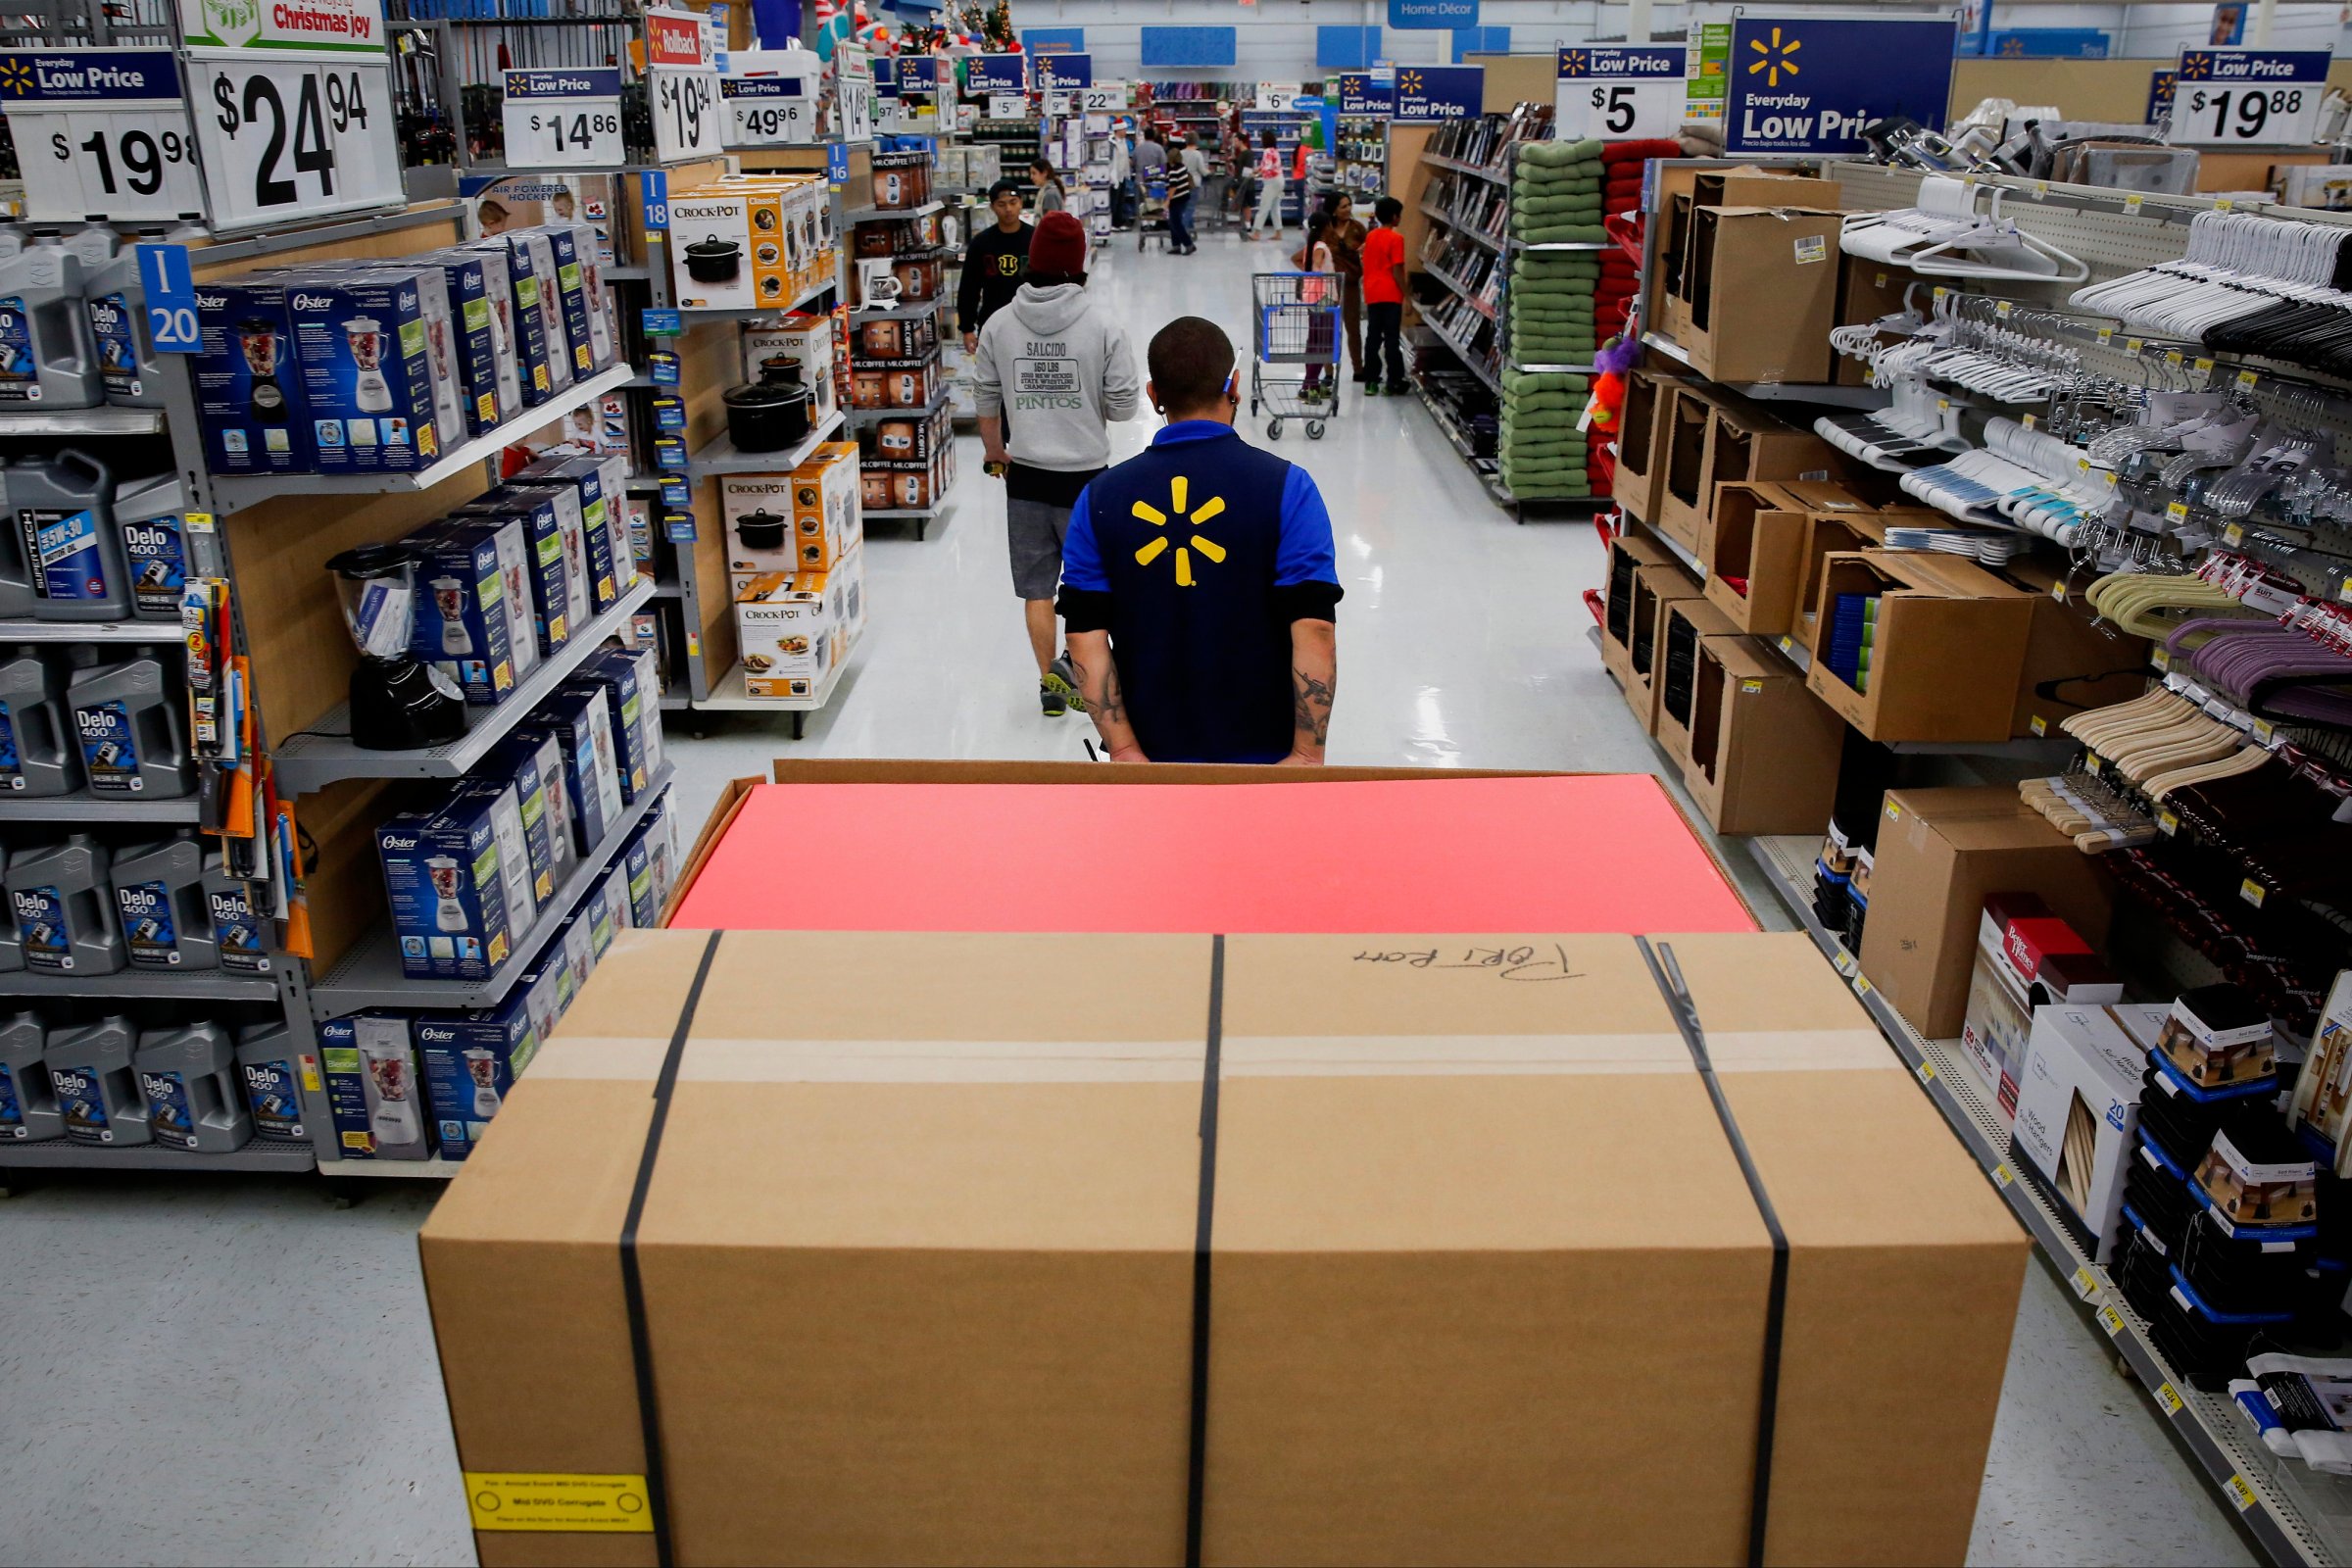 An employee pulls a forklift with display units for DVD movies at a Wal-Mart Stores Inc. location ahead of Black Friday in Los Angeles, Calif. on Nov. 24, 2014.